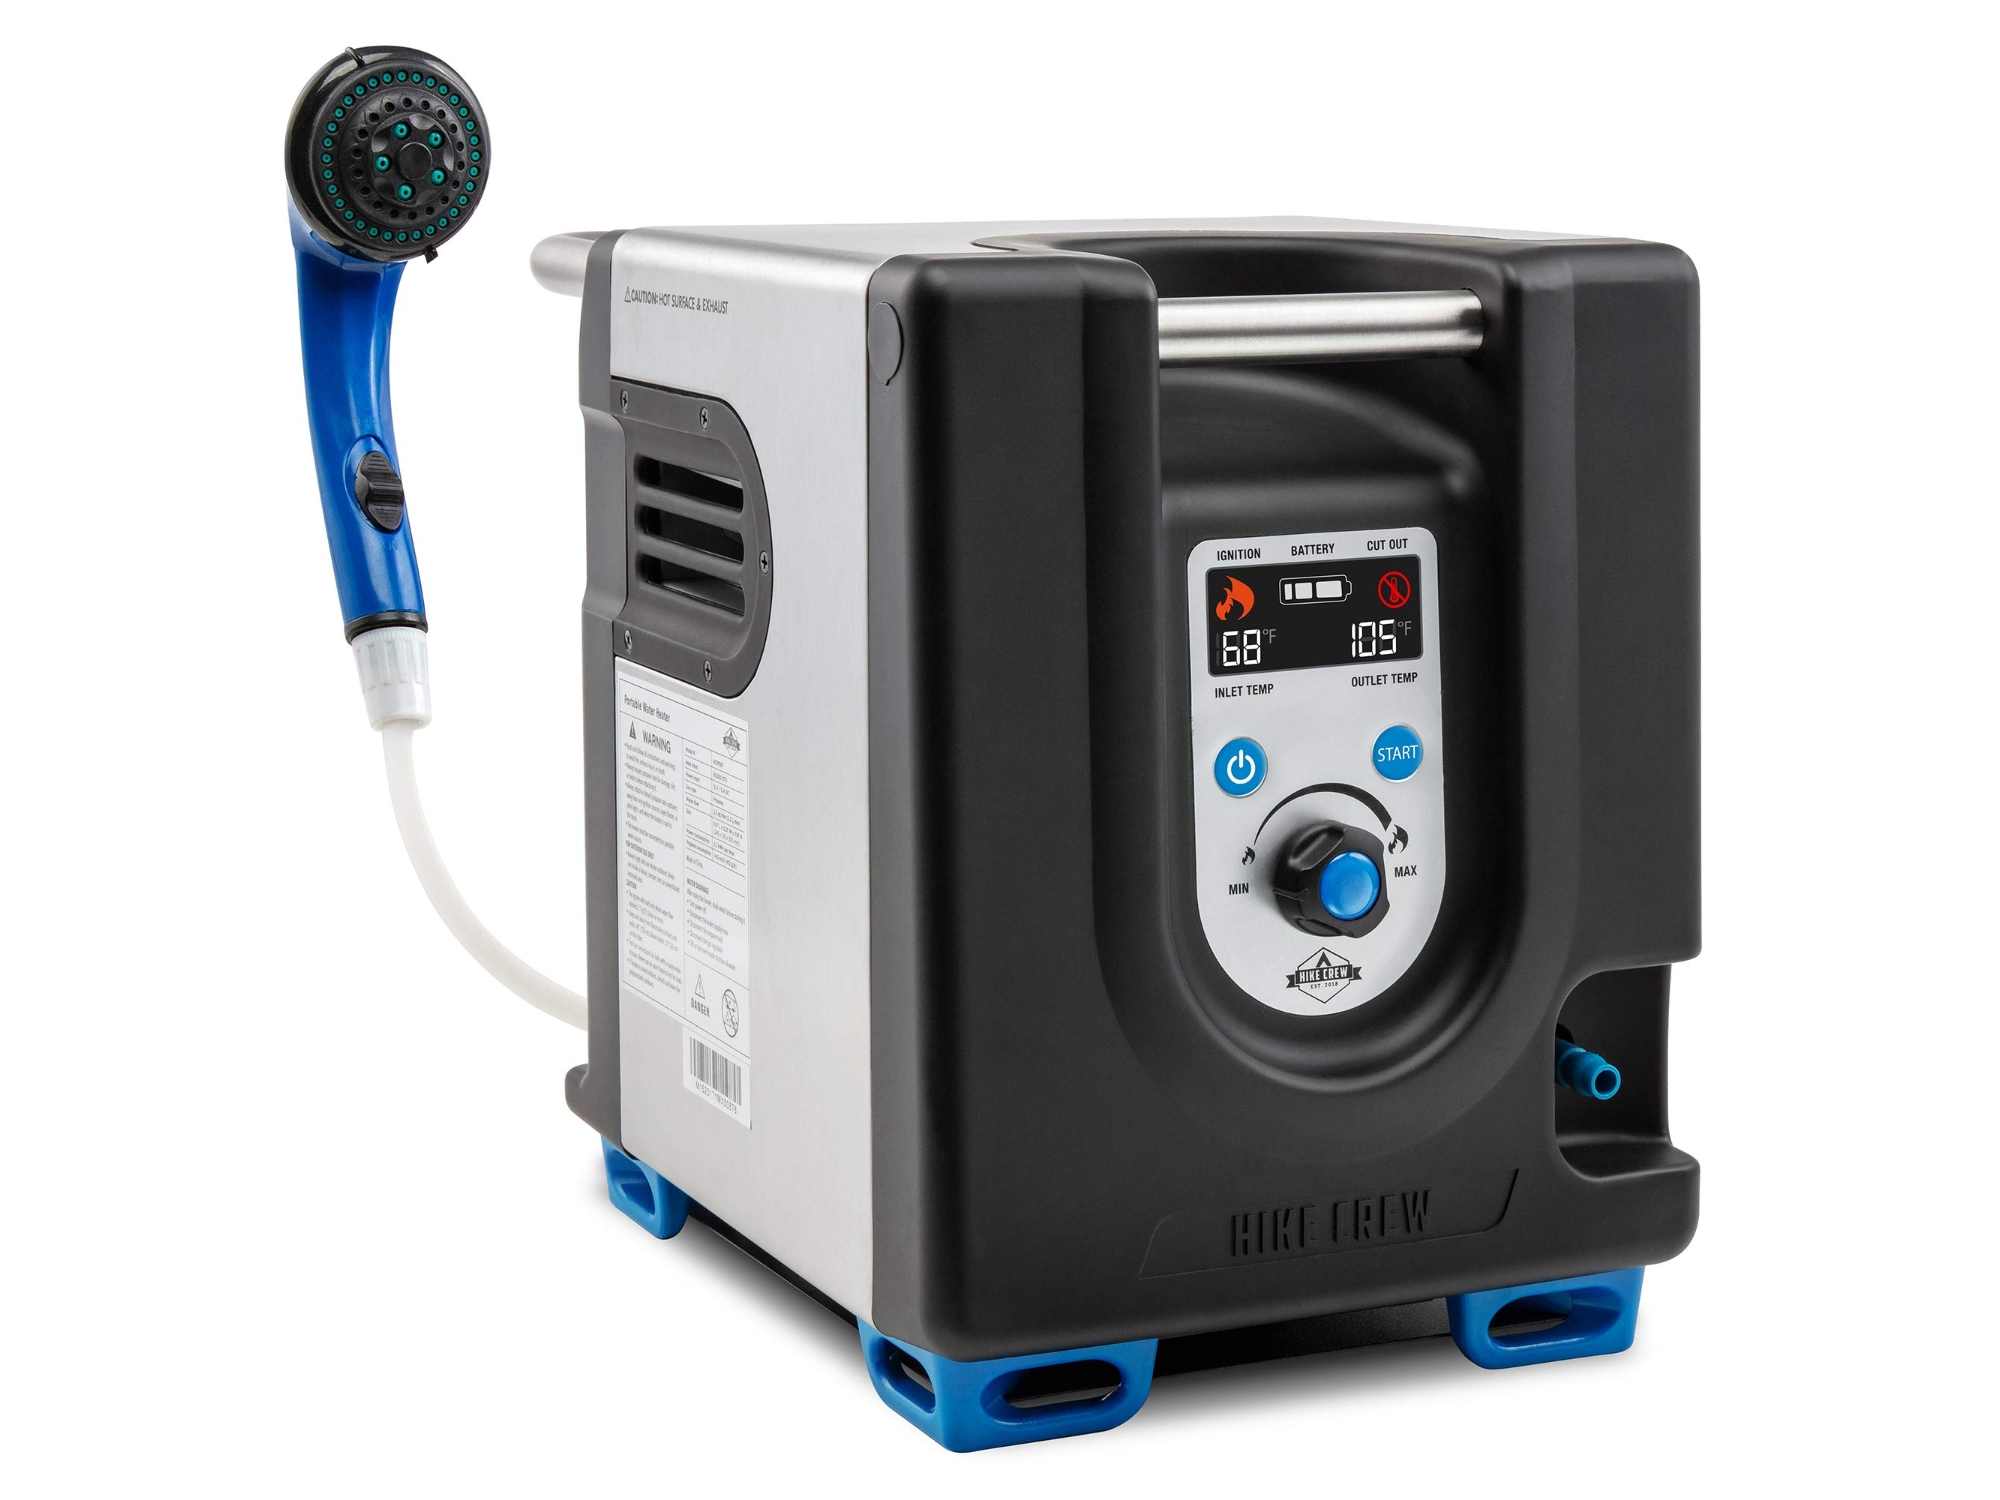 Image of Hike Crew Portable Propane Water Heater & Shower Pump Built-in Battery ID 843812150217